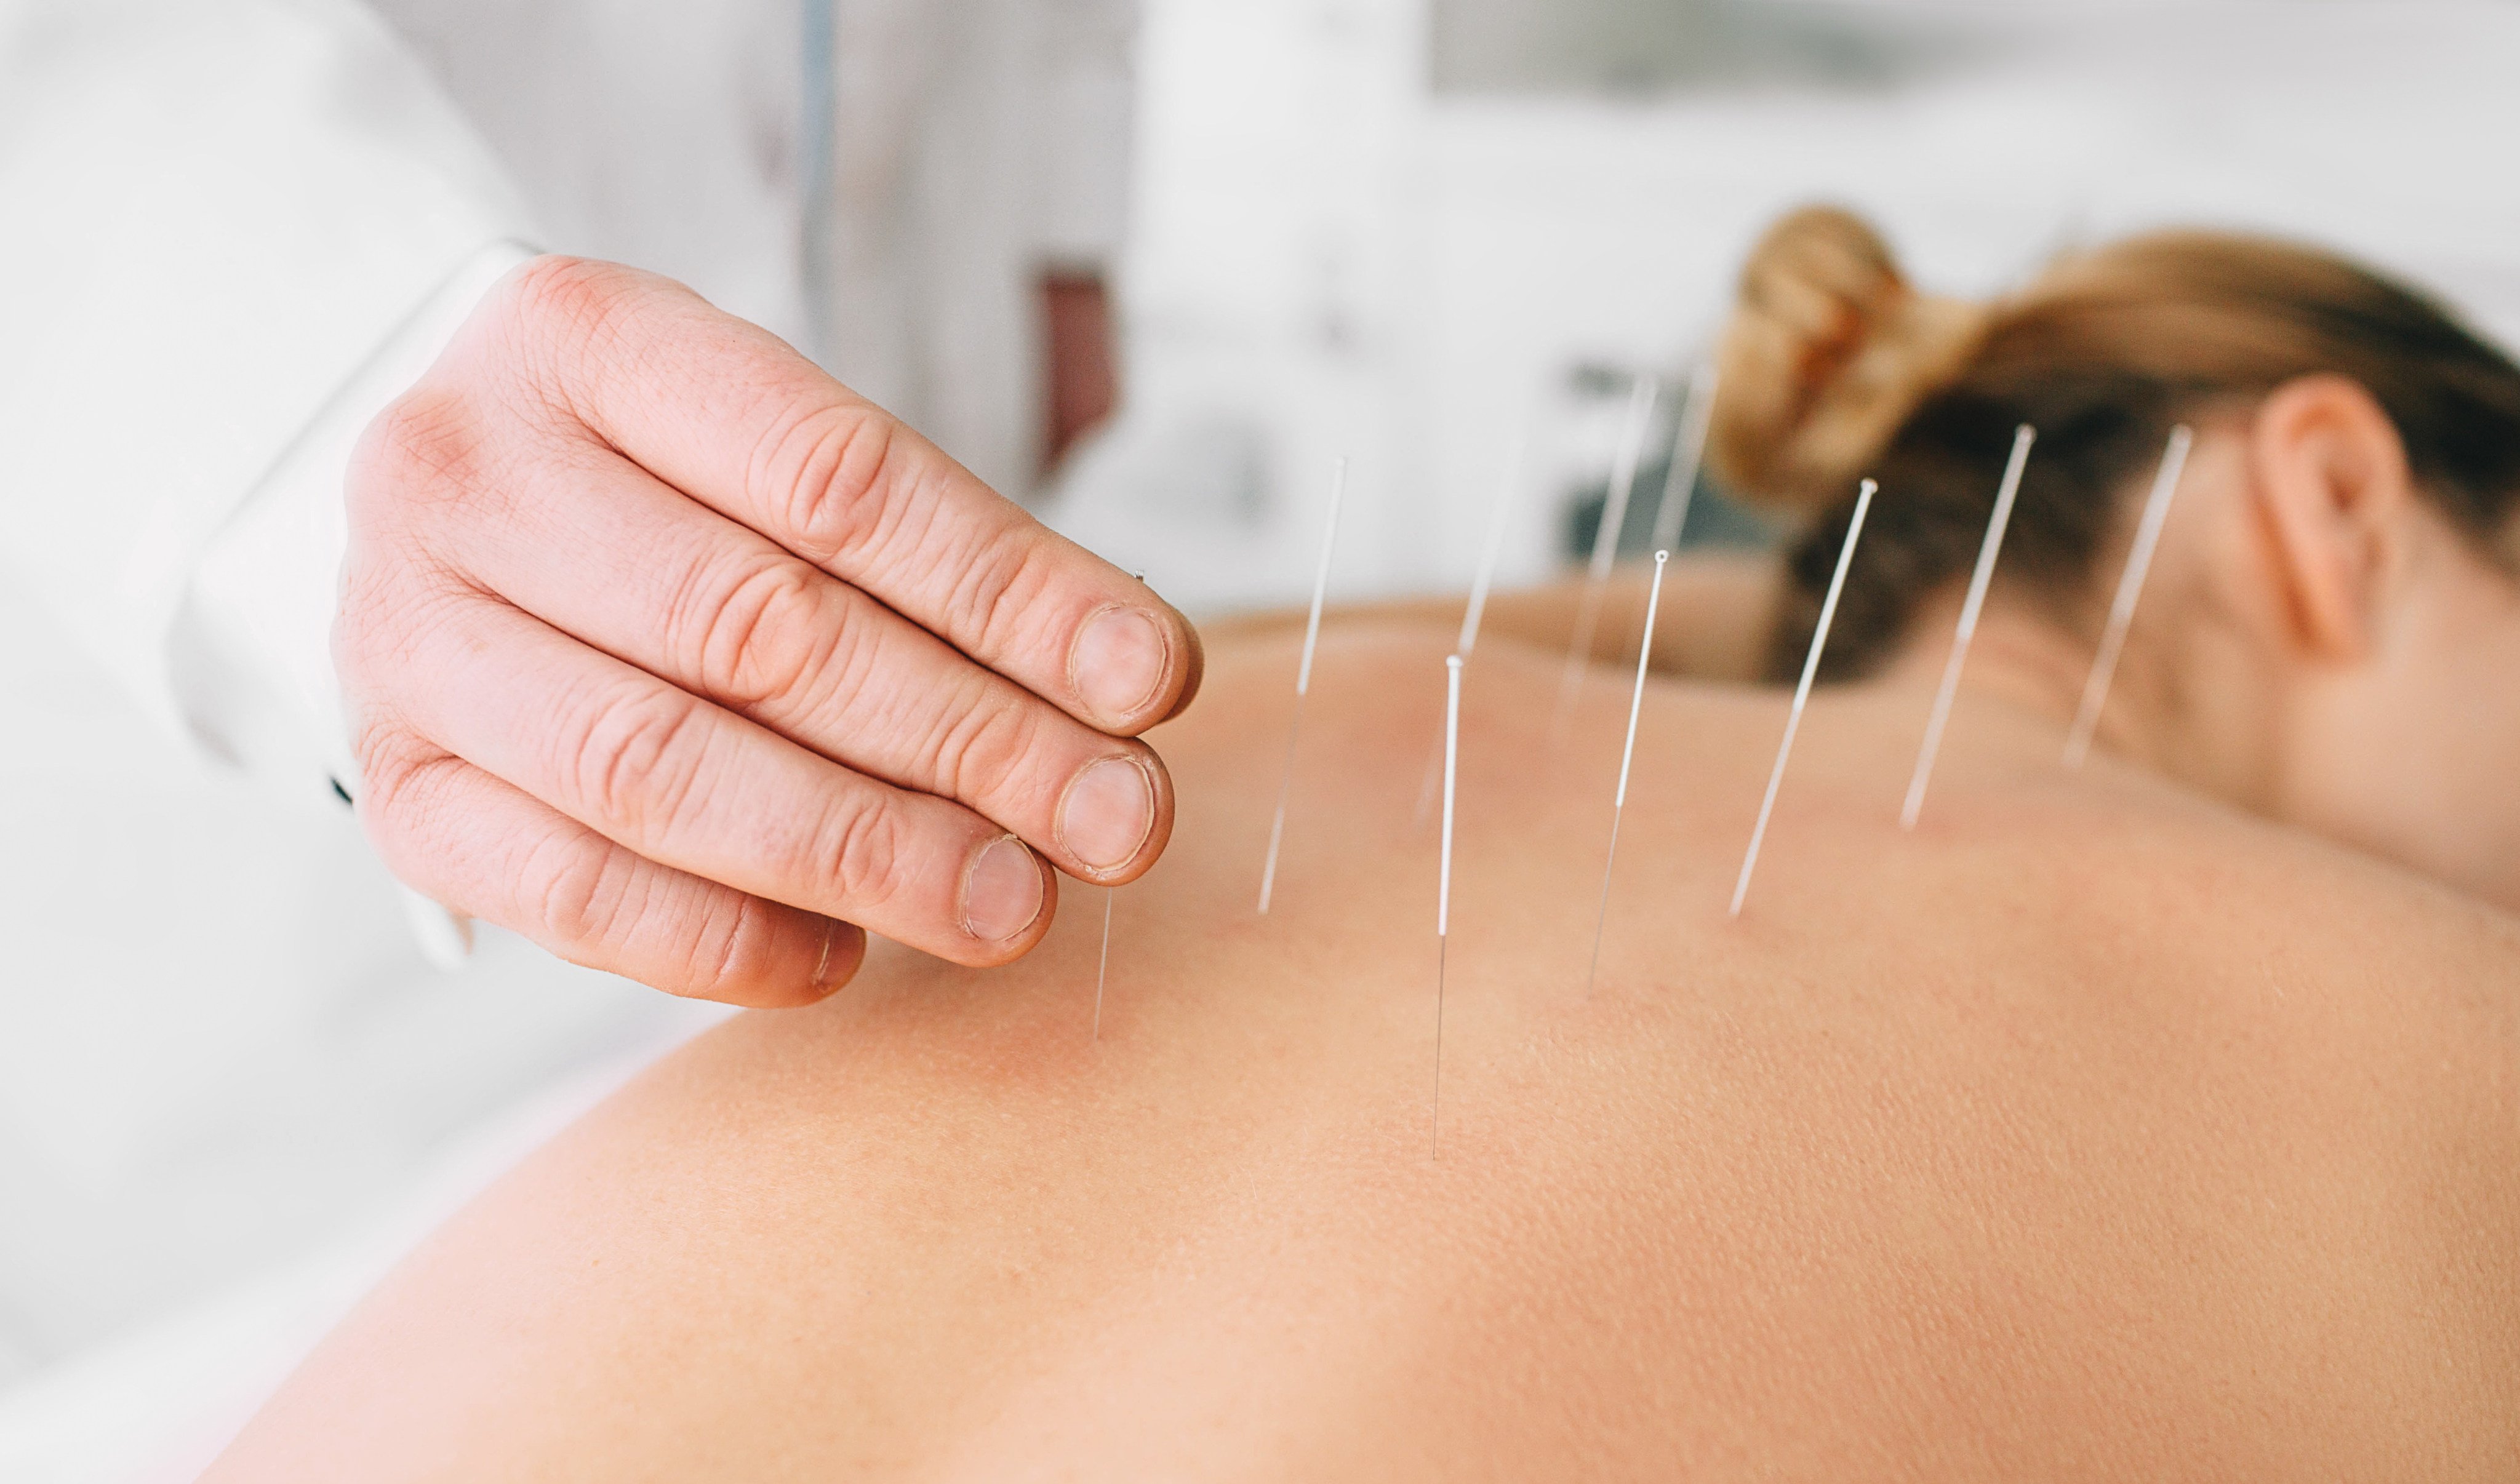 Acupuncture is the most common form of traditional Chinese medicine in use at Hong Kong hospitals. The city is taking steps to more fully integrate TCM into its healthcare system, but there are some challenges to overcome. Photo: Shutterstock